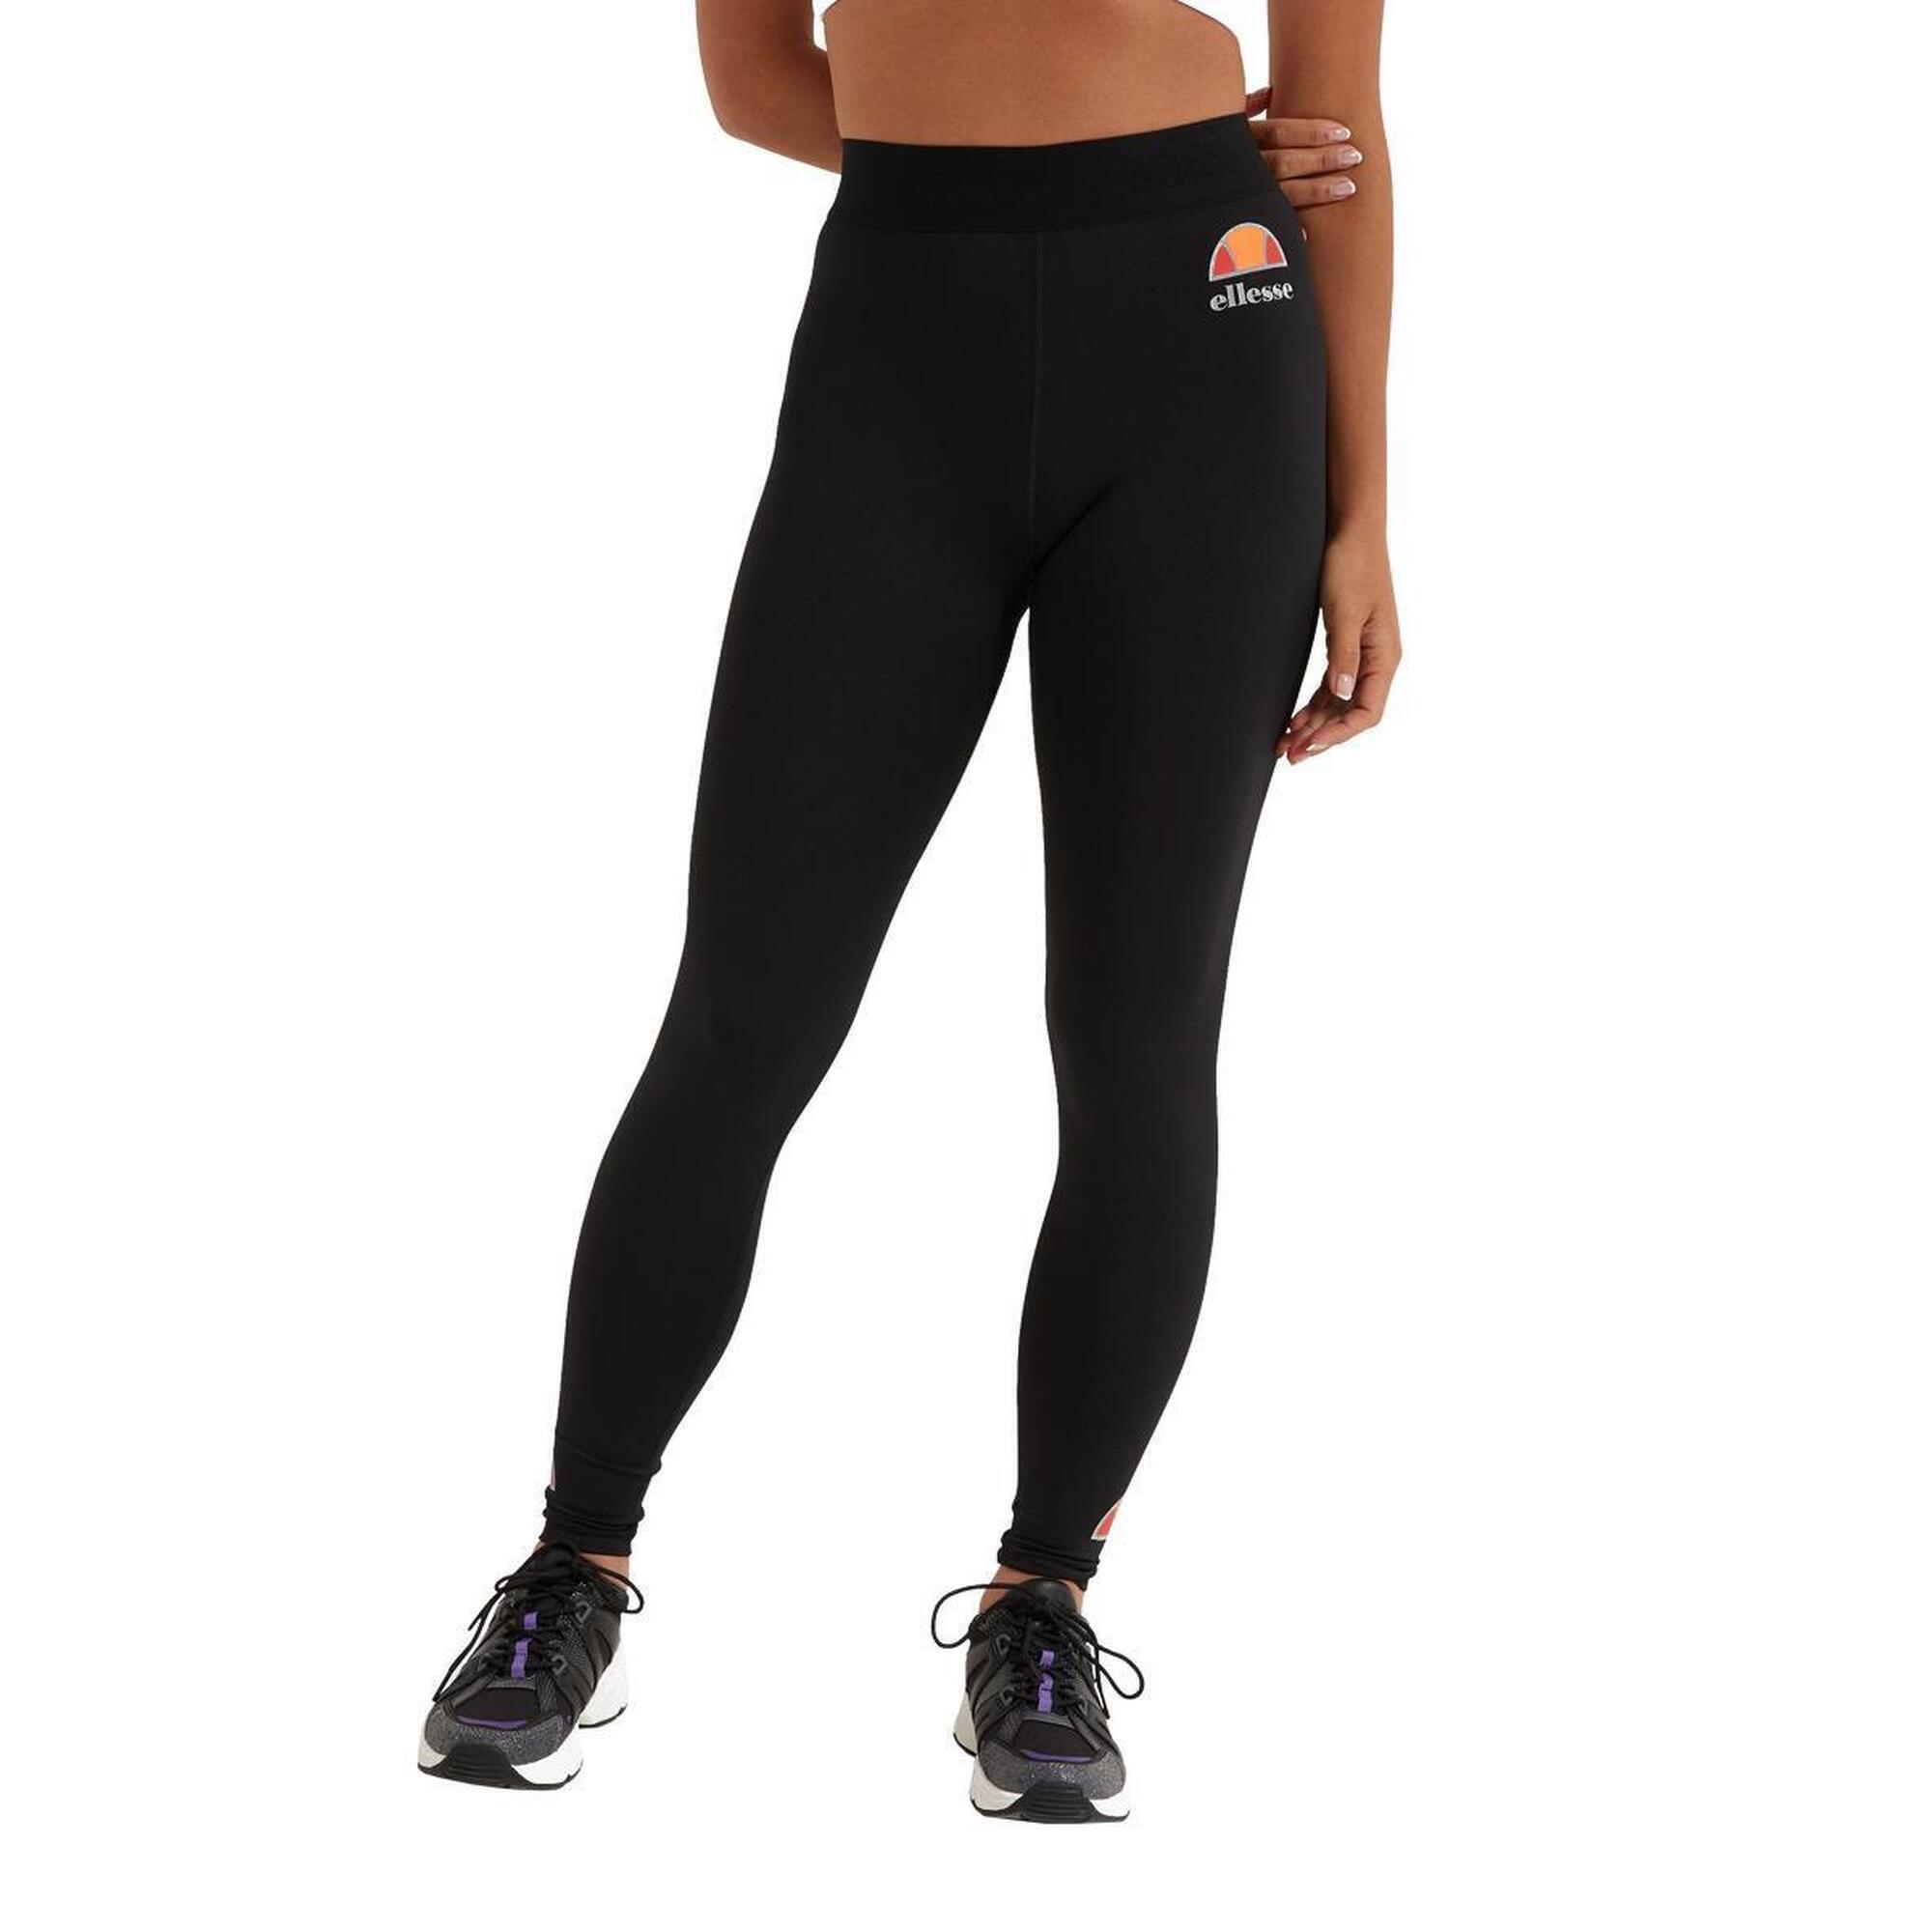 LEGGING MELISSA high waist with removable knee and hip pads - Decathlon